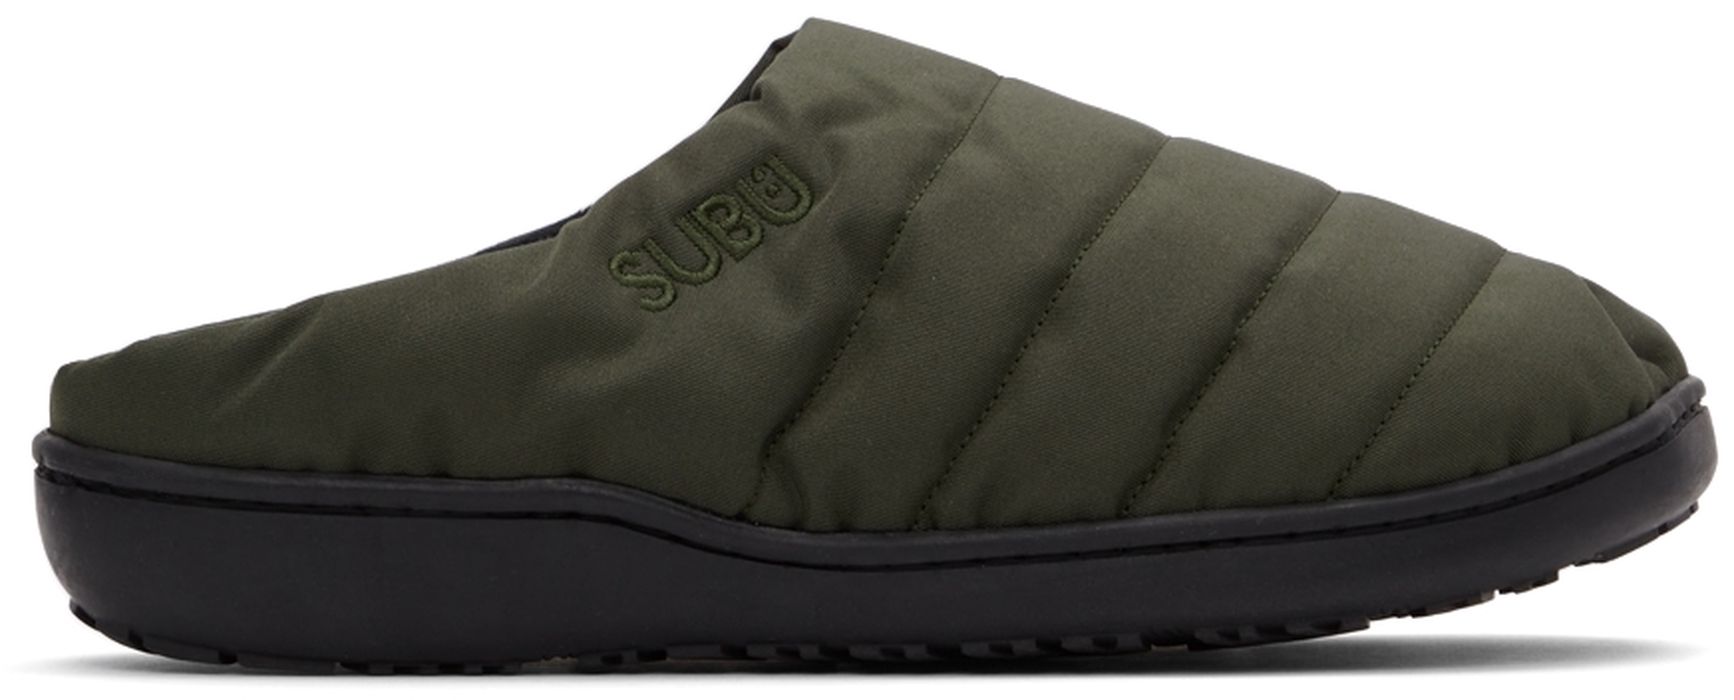 SUBU Khaki Quilted Slippers